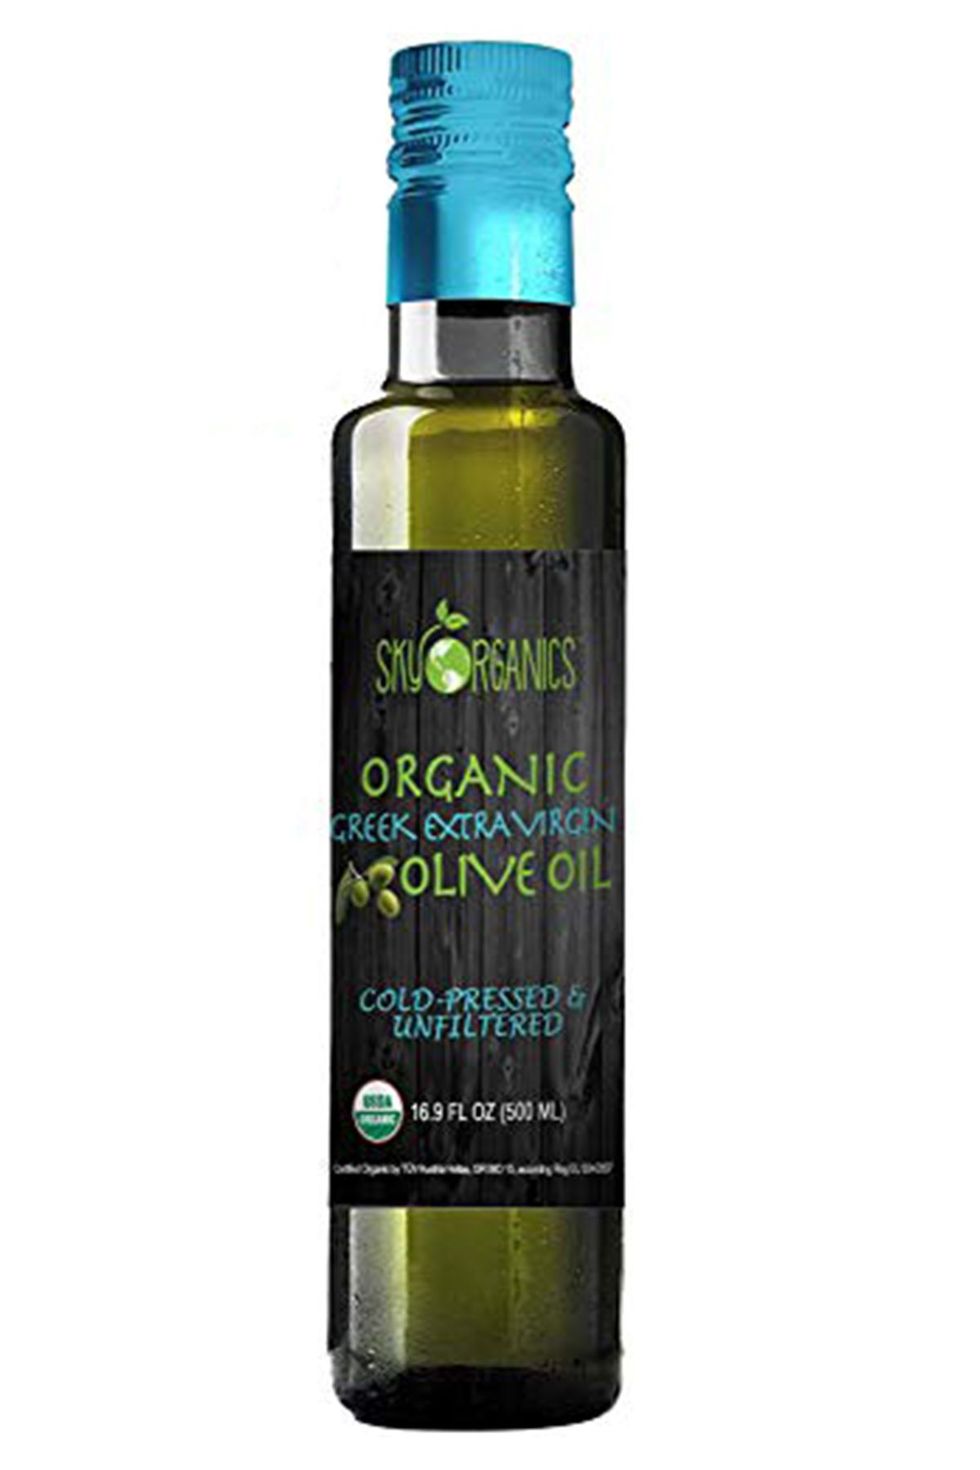 Benefits of Using Olive Oil for Skin - Is Olive Oil Good for Skin?